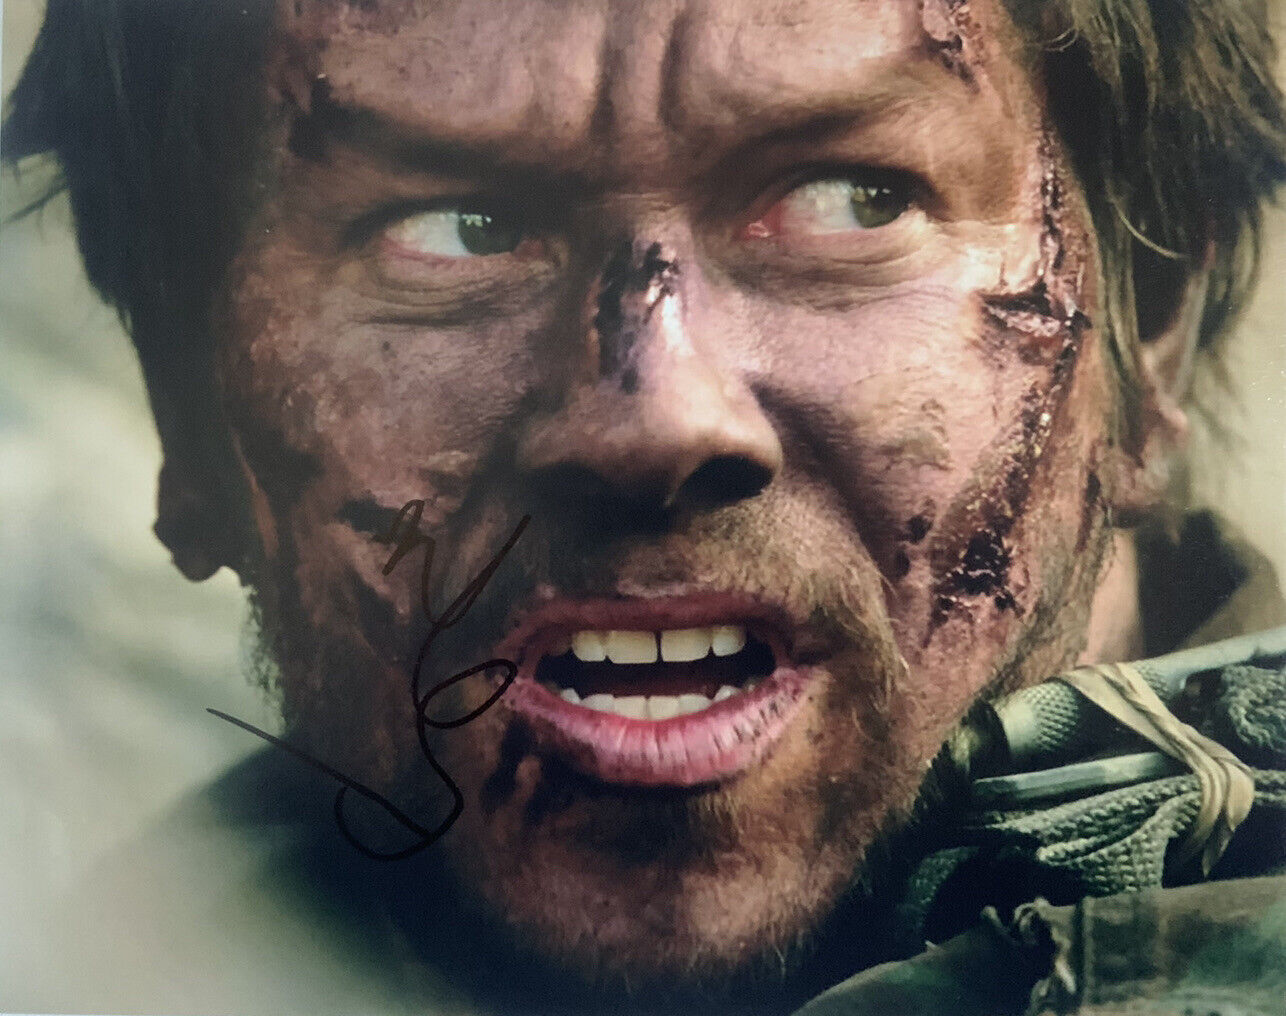 MARK WAHLBERG HAND SIGNED 8x10 Photo Poster painting LONE SURVIVOR MOVIE AUTHENTIC AUTOGRAPH COA